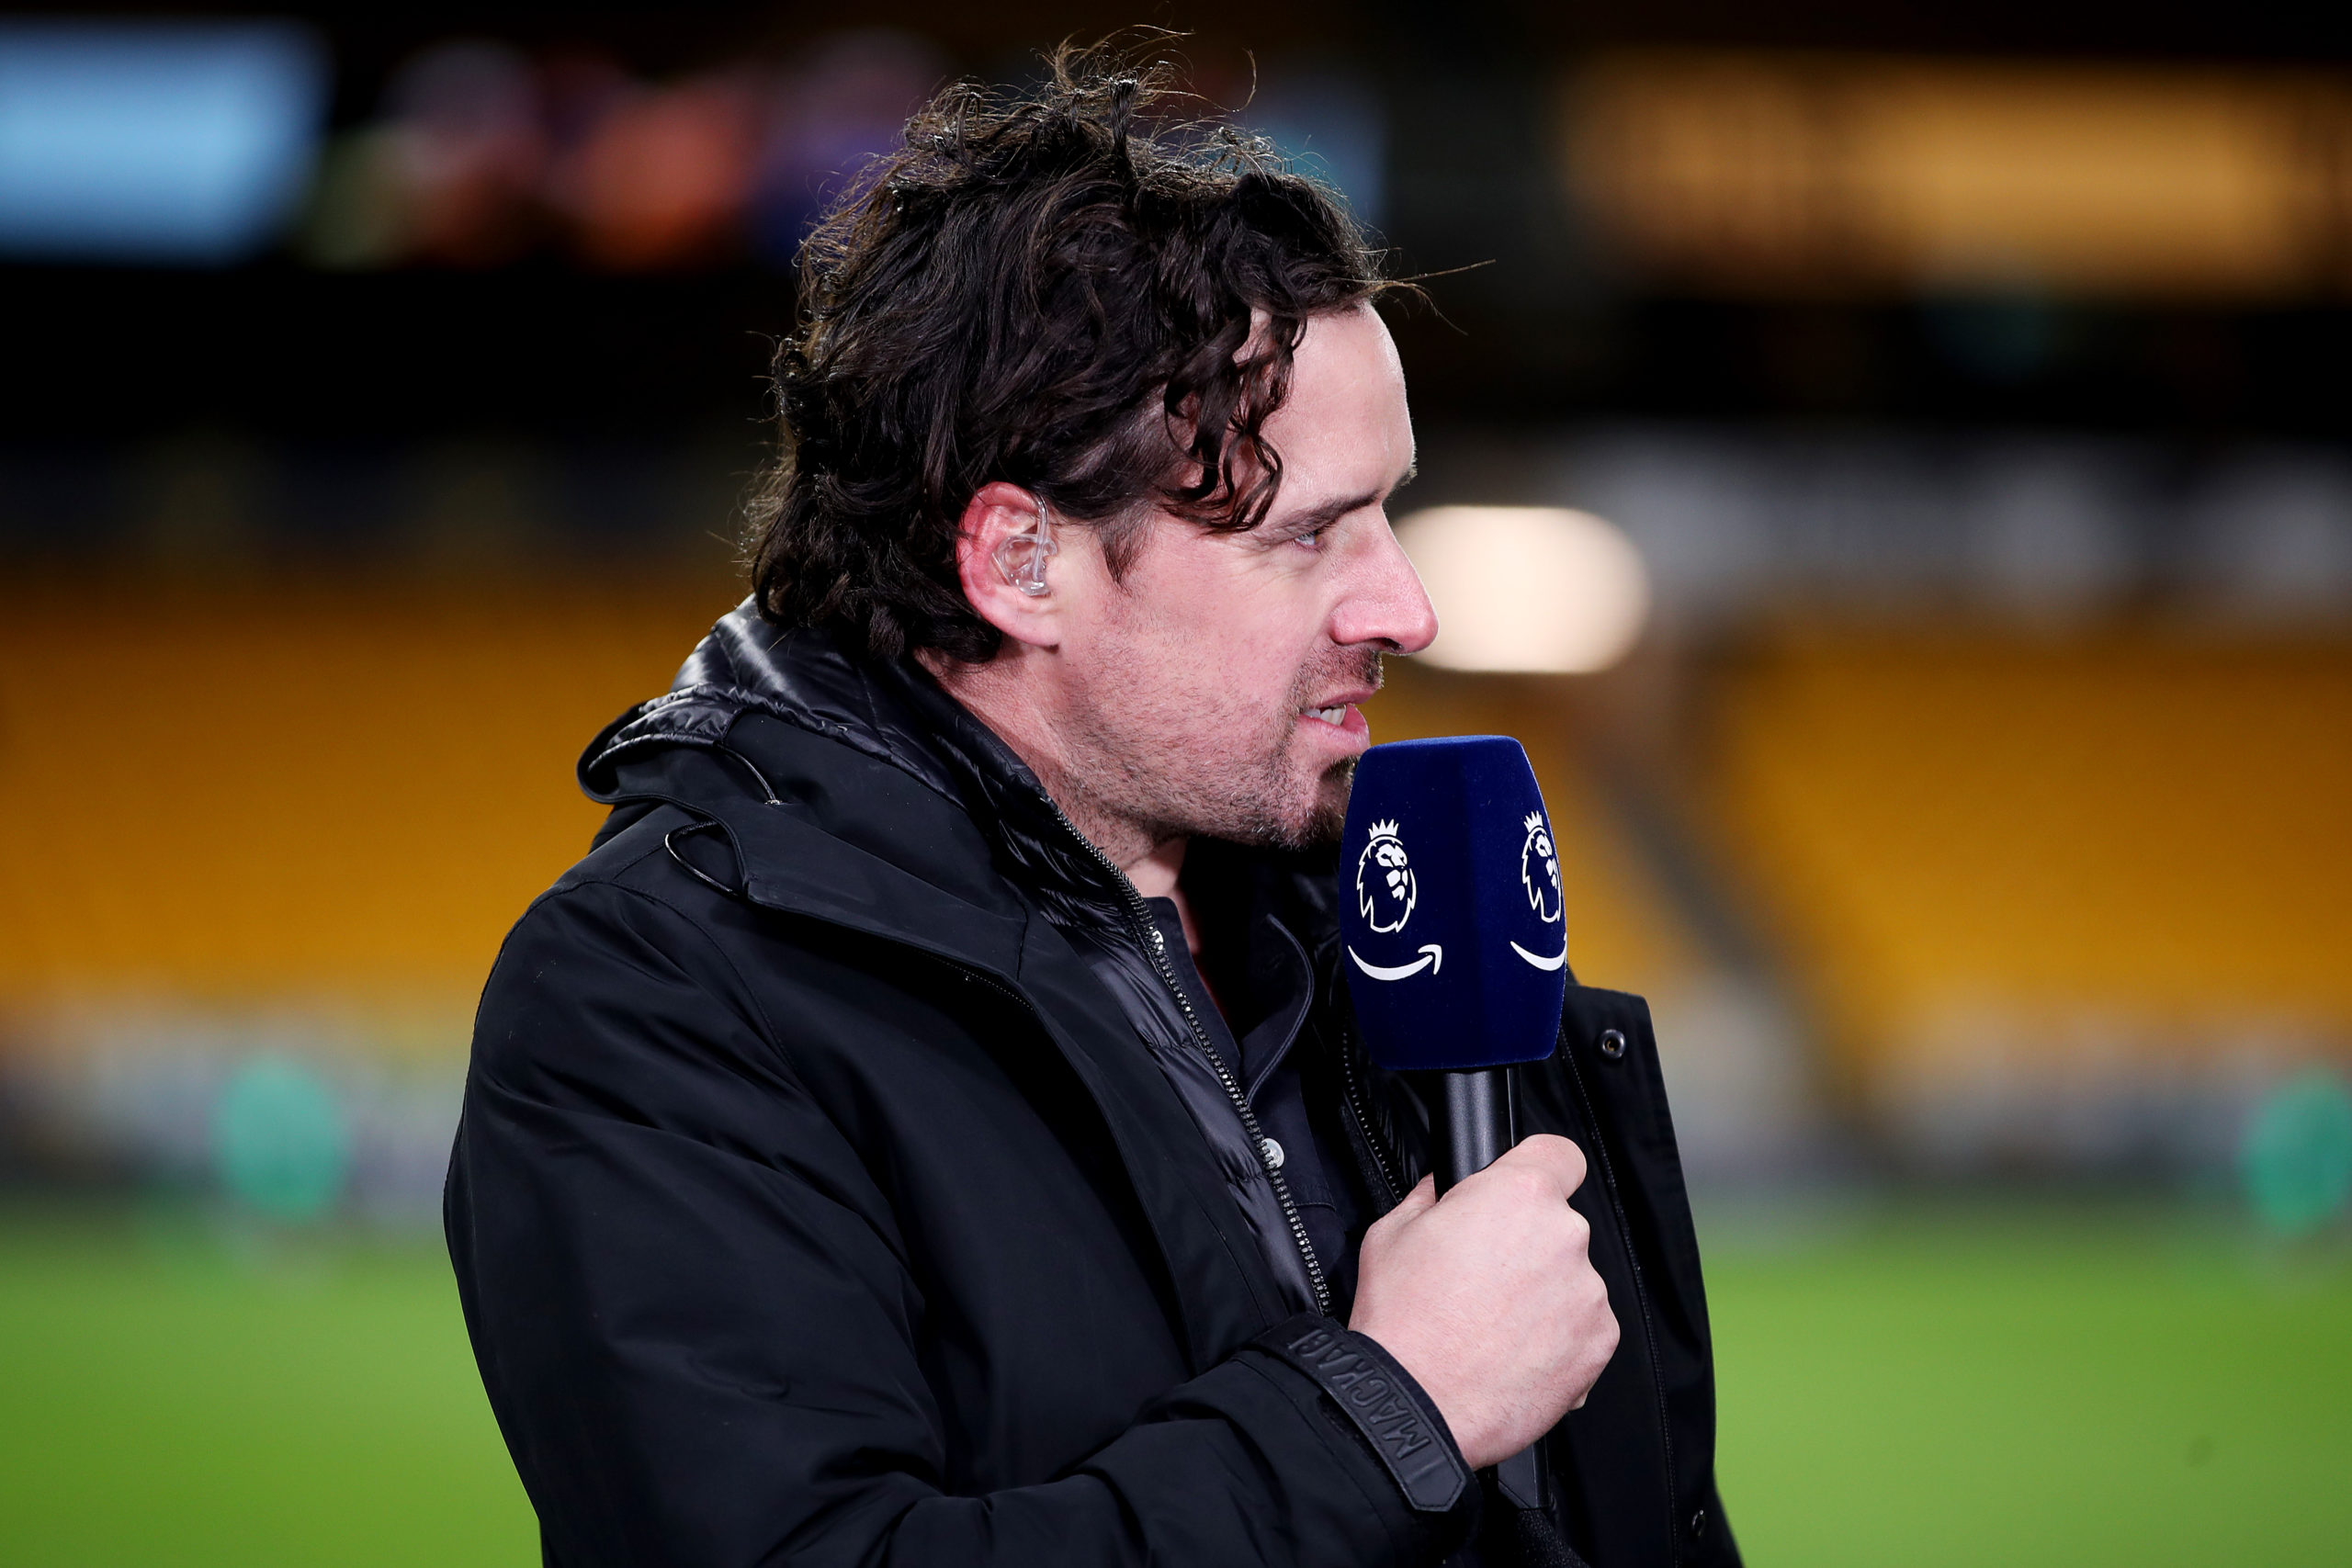 ‘Amazing’: Owen Hargreaves says what Chelsea loanee has done this season is truly ‘remarkable’